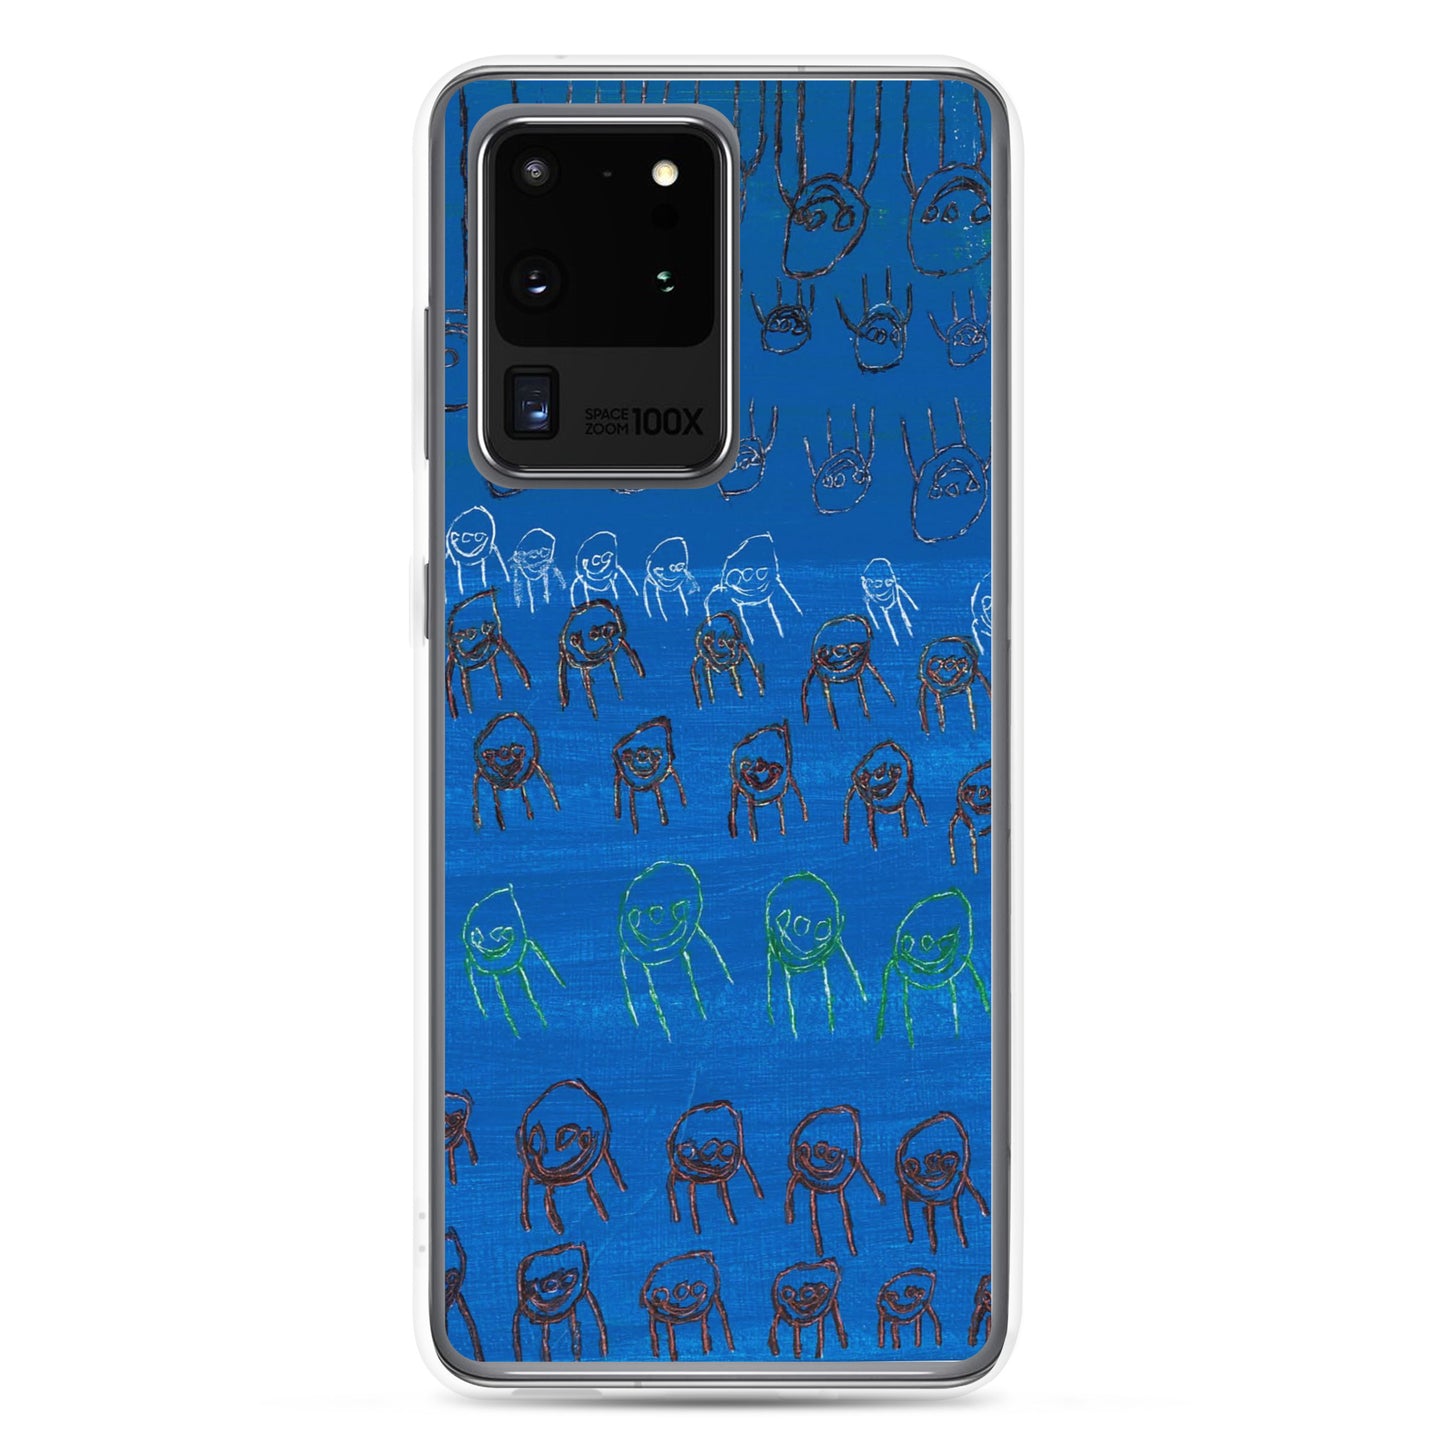 Samsung Case - "Colourful People"